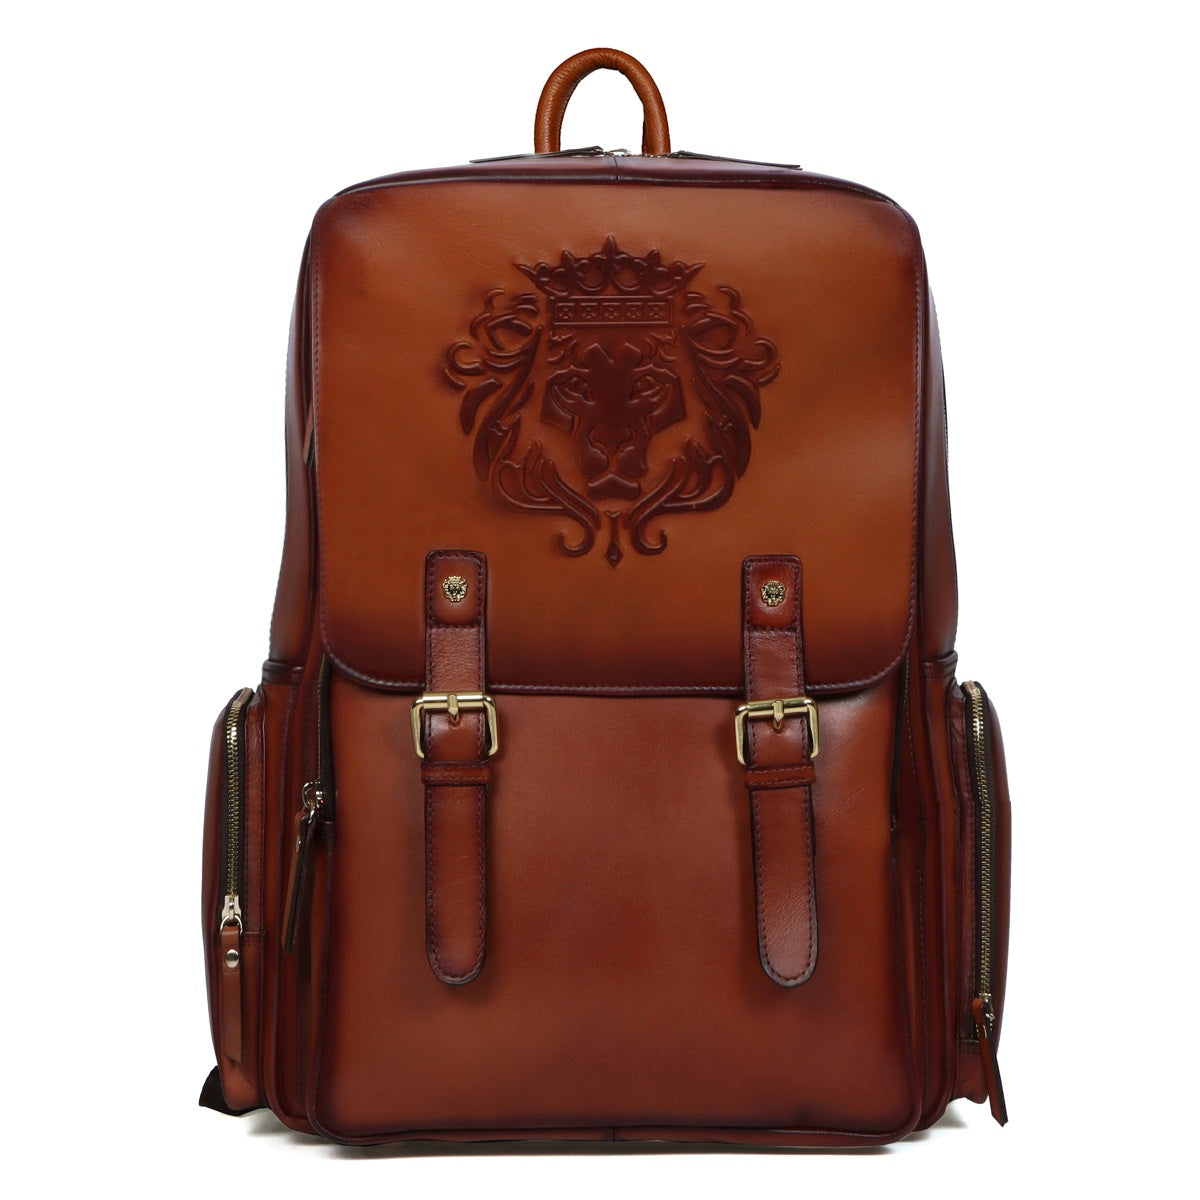 Travel Tan Leather Backpack